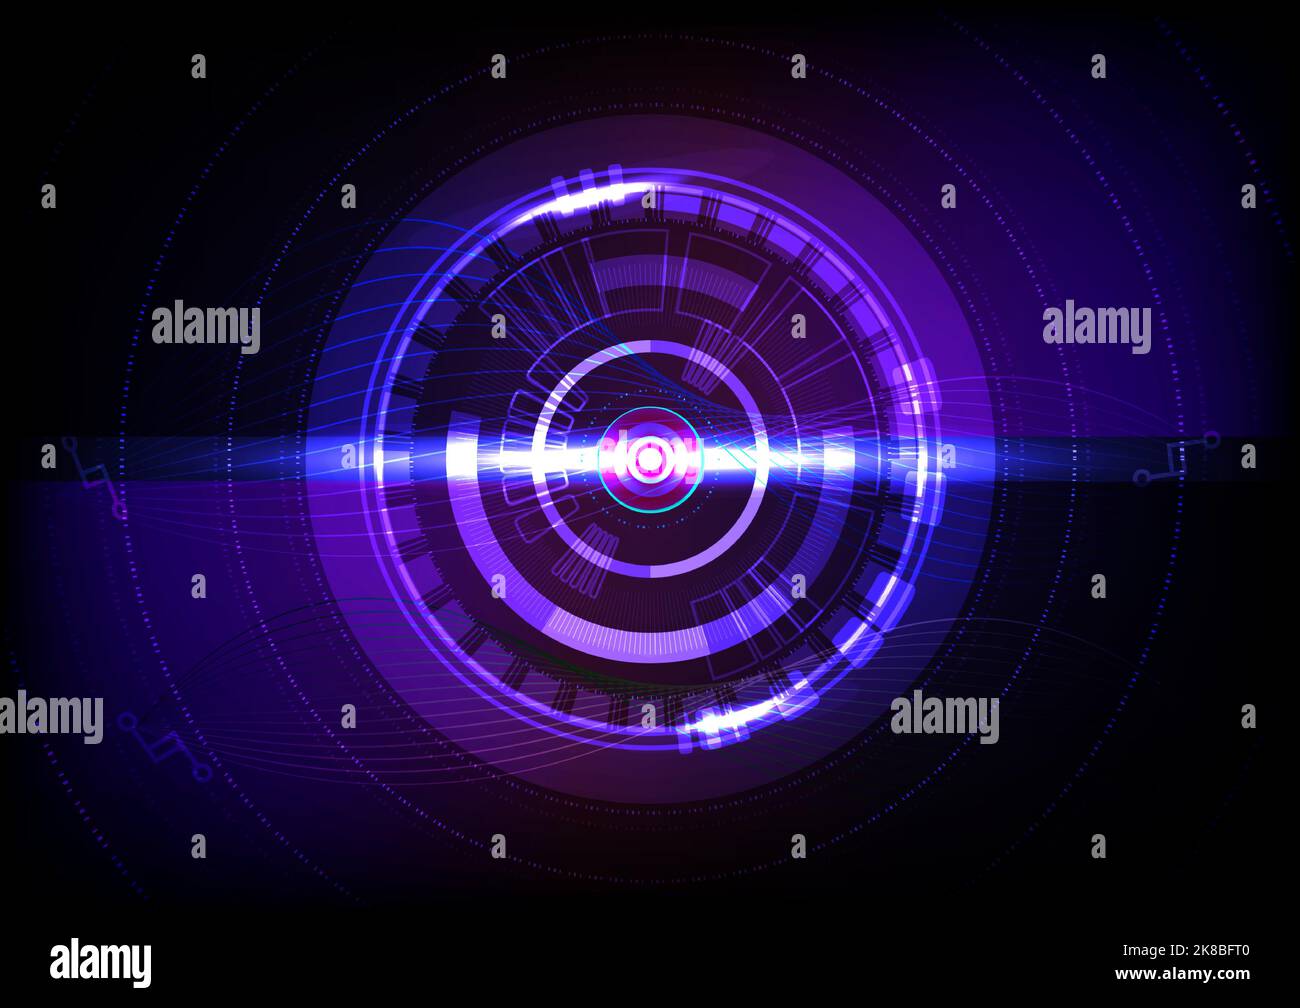 Tech circle electricity power system abstract background futuristic wallpaper graphic design vector illustration Stock Vector